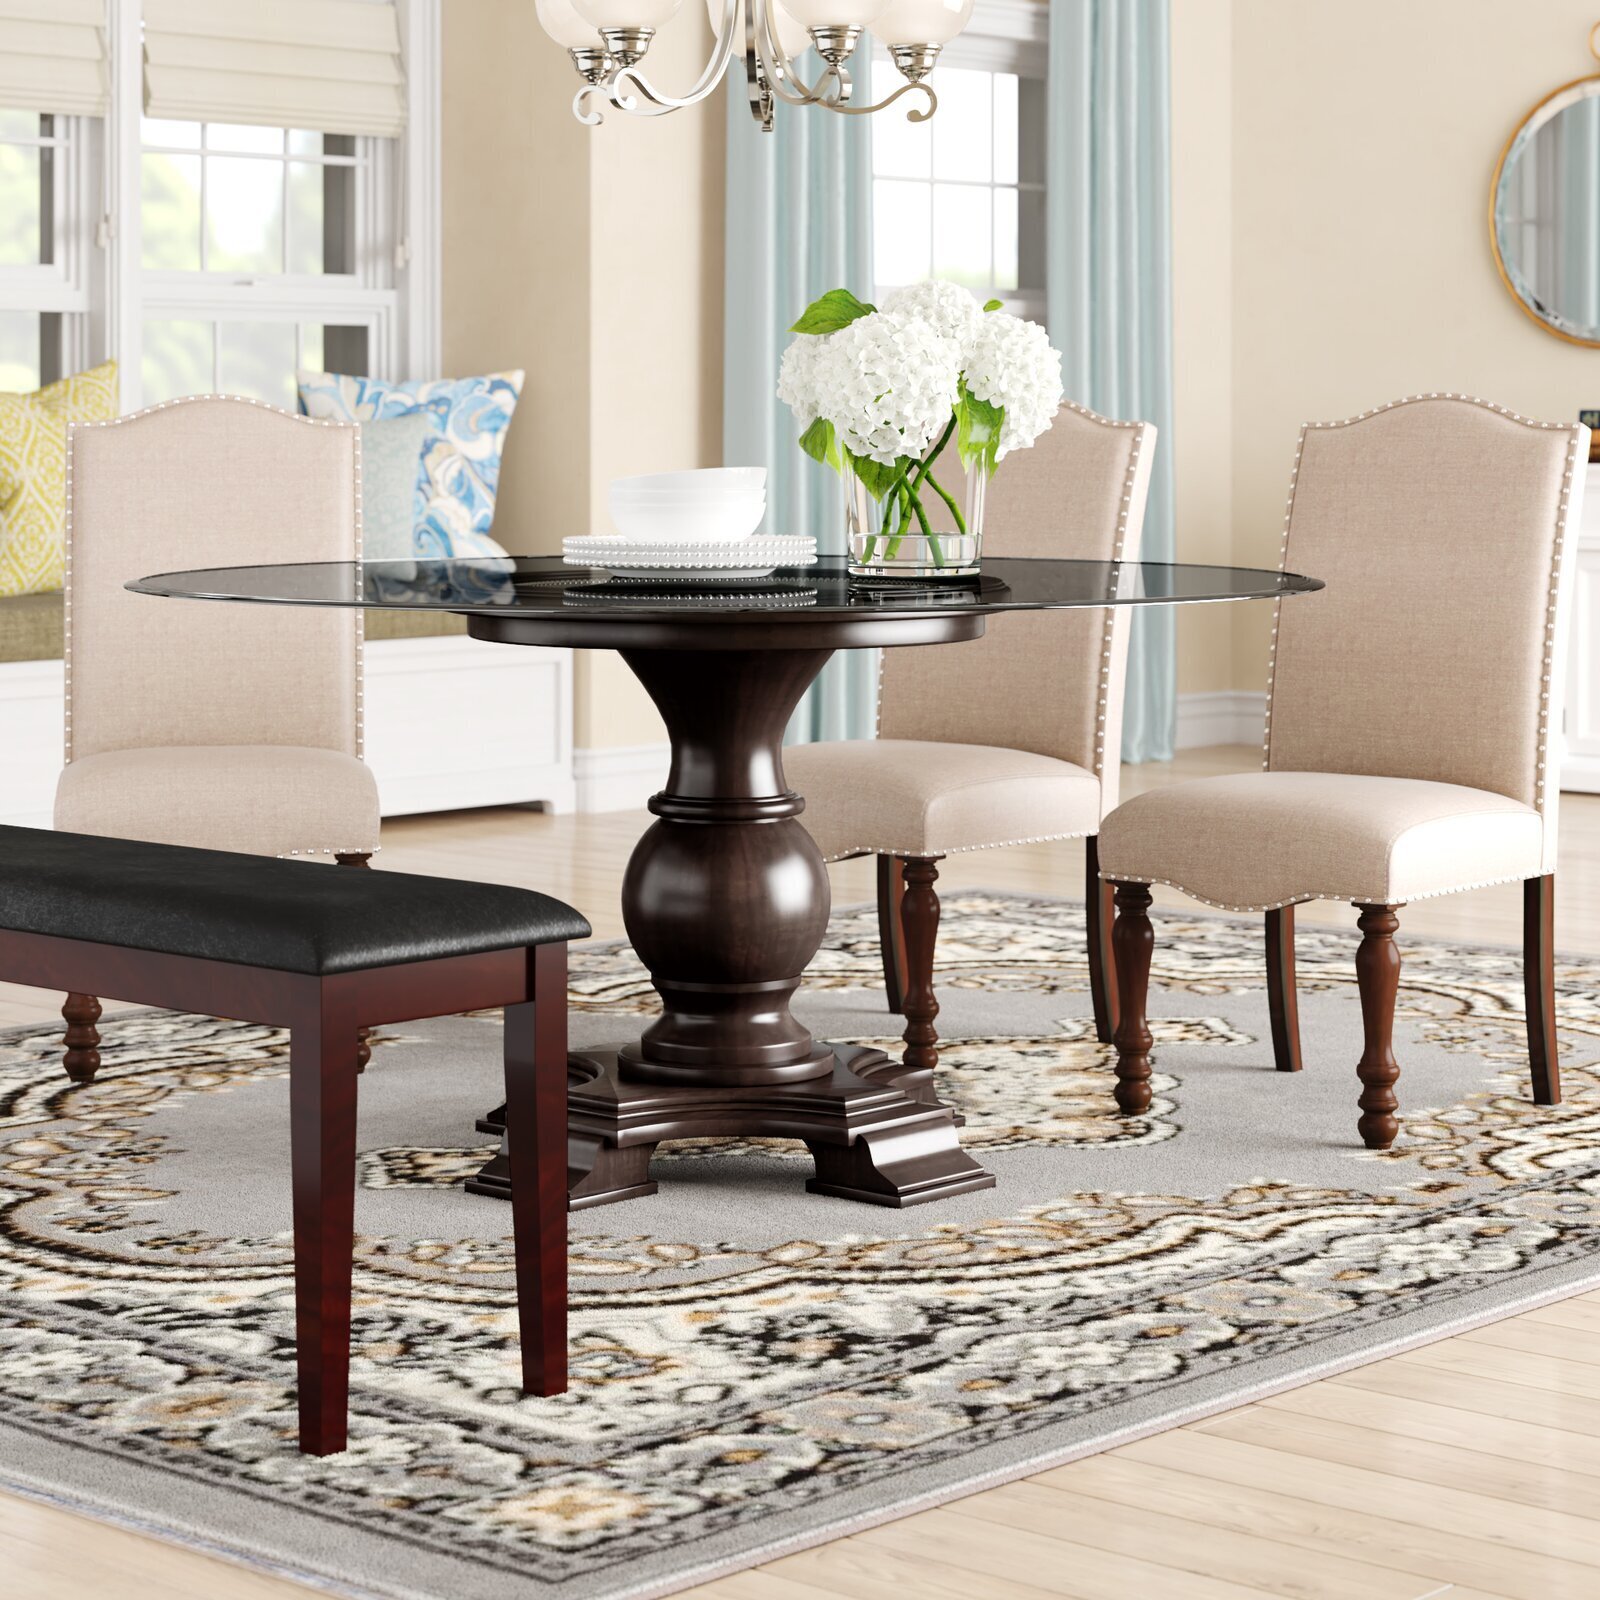 Traditional pedestal dining table with glass top